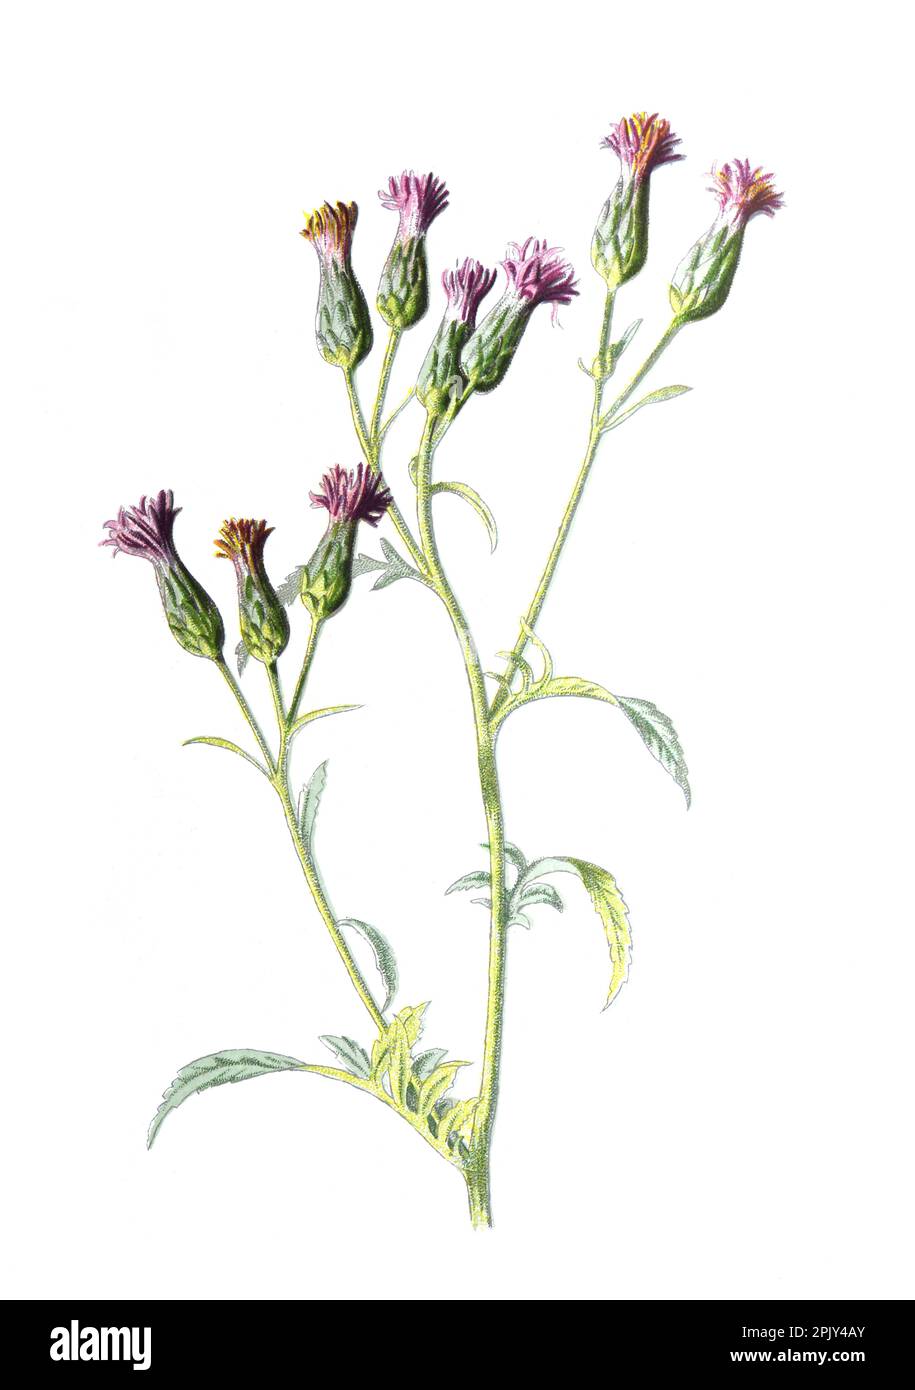 Serratula tinctoria,commonly known as dyer's plumeless saw-wor the daisy family Asteraceaet flower. vintage hand drawn wild field flower illustration. Stock Photo